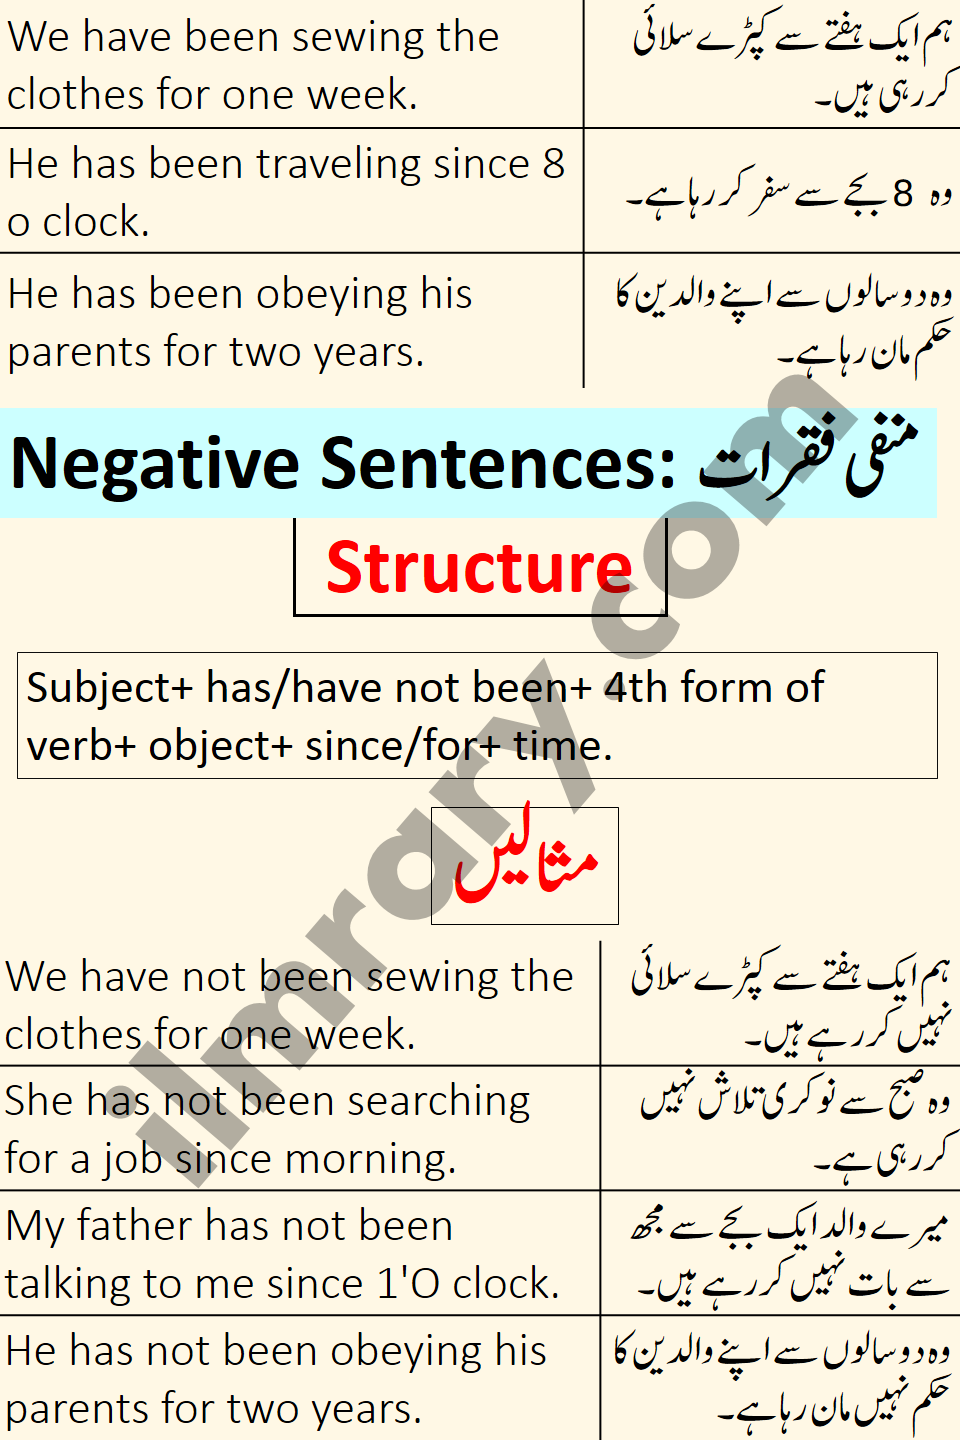 Negative Examples for Present Perfect Continuous Tense in Urdu